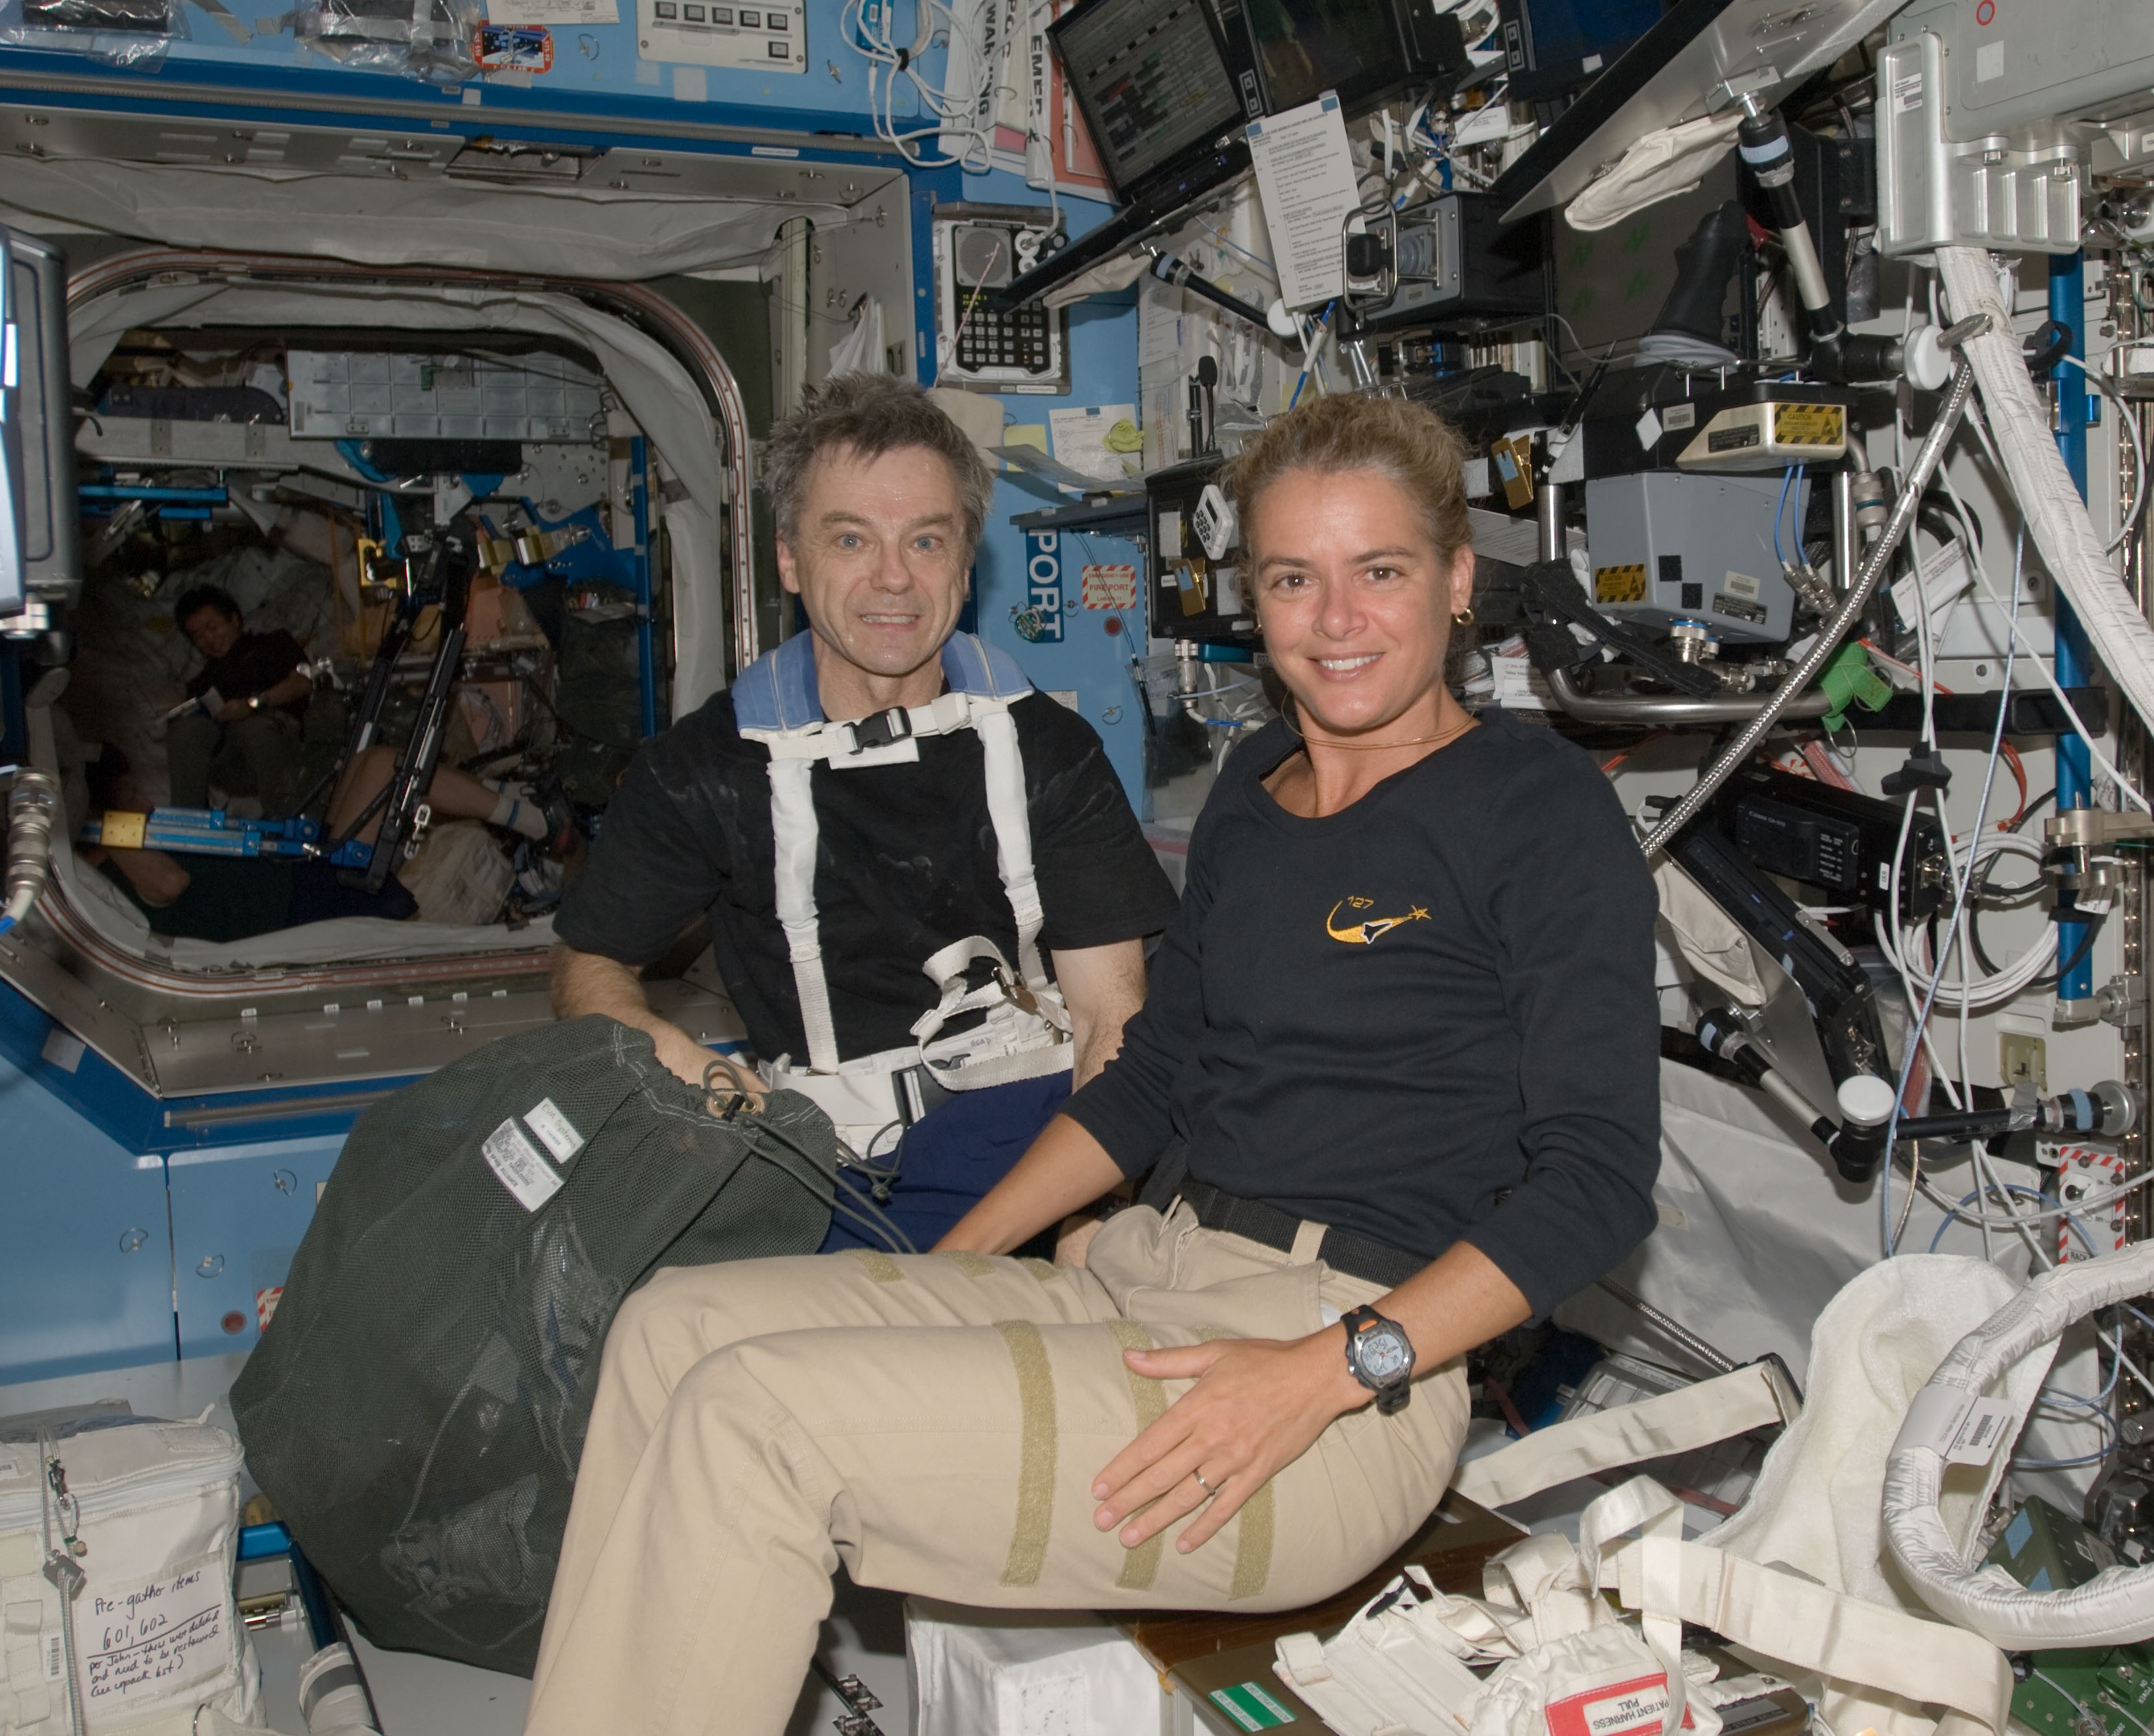 The first time two Canadians were in space at the same time